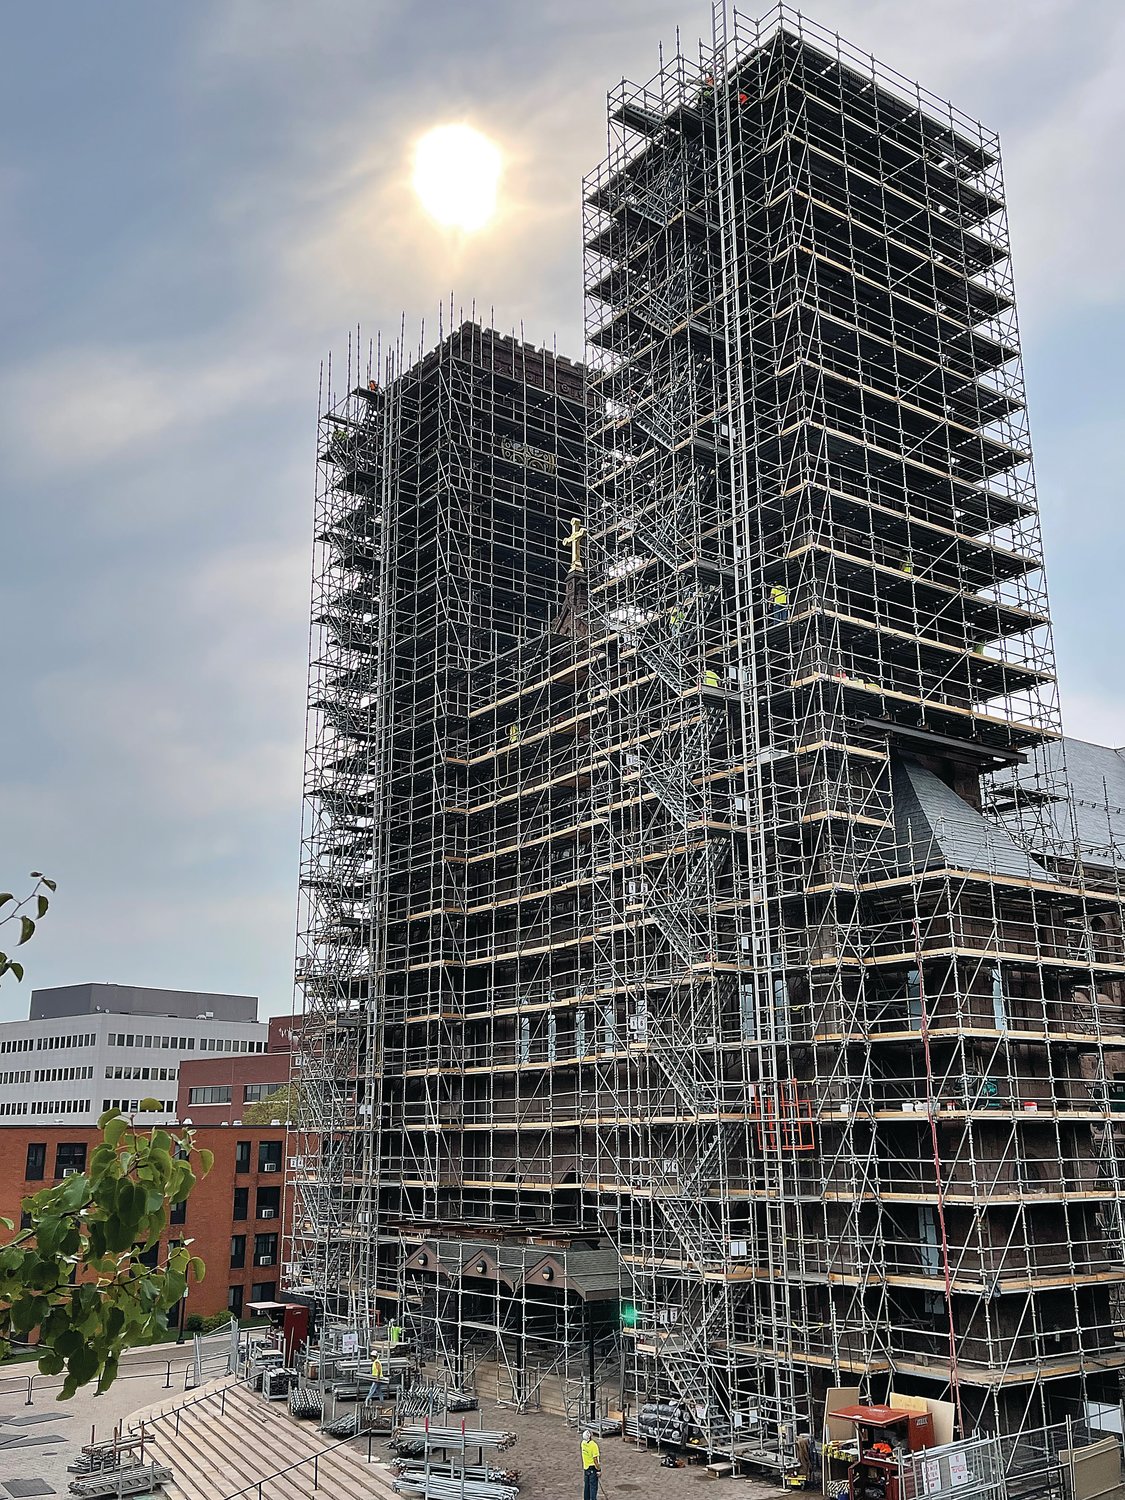 The morning sun shines upon the Cathedral of SS. Peter and Paul on Monday as workers ascend the scaffolding to begin another day of repairs on its sandstone towers.